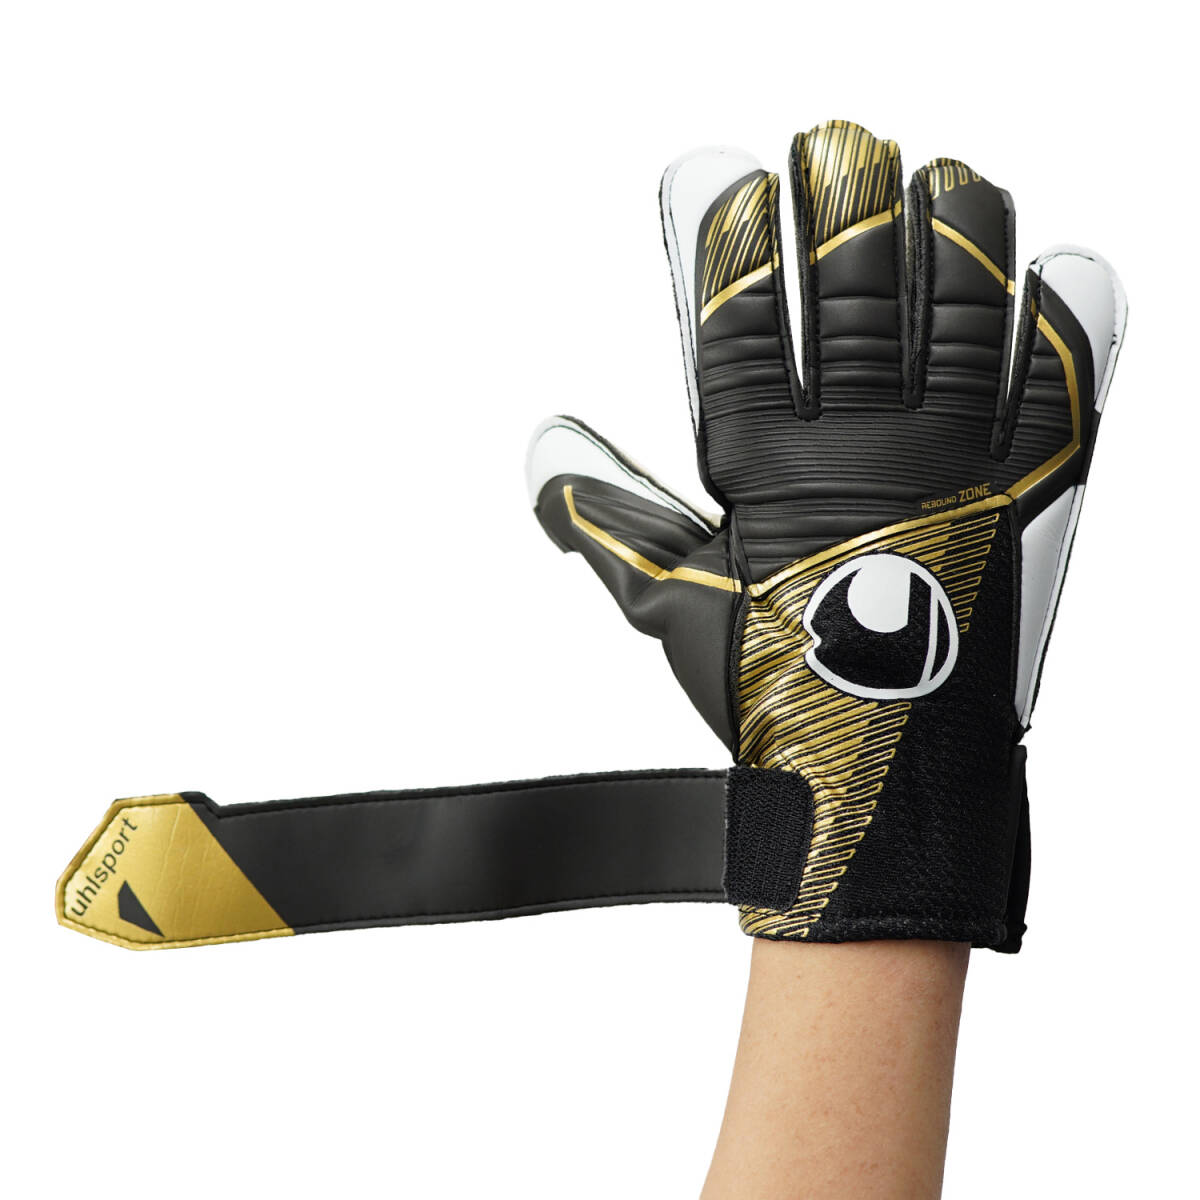  keeper glove /6 number / limitated model / wool sport / black x Gold / Junior /4180 jpy prompt decision 